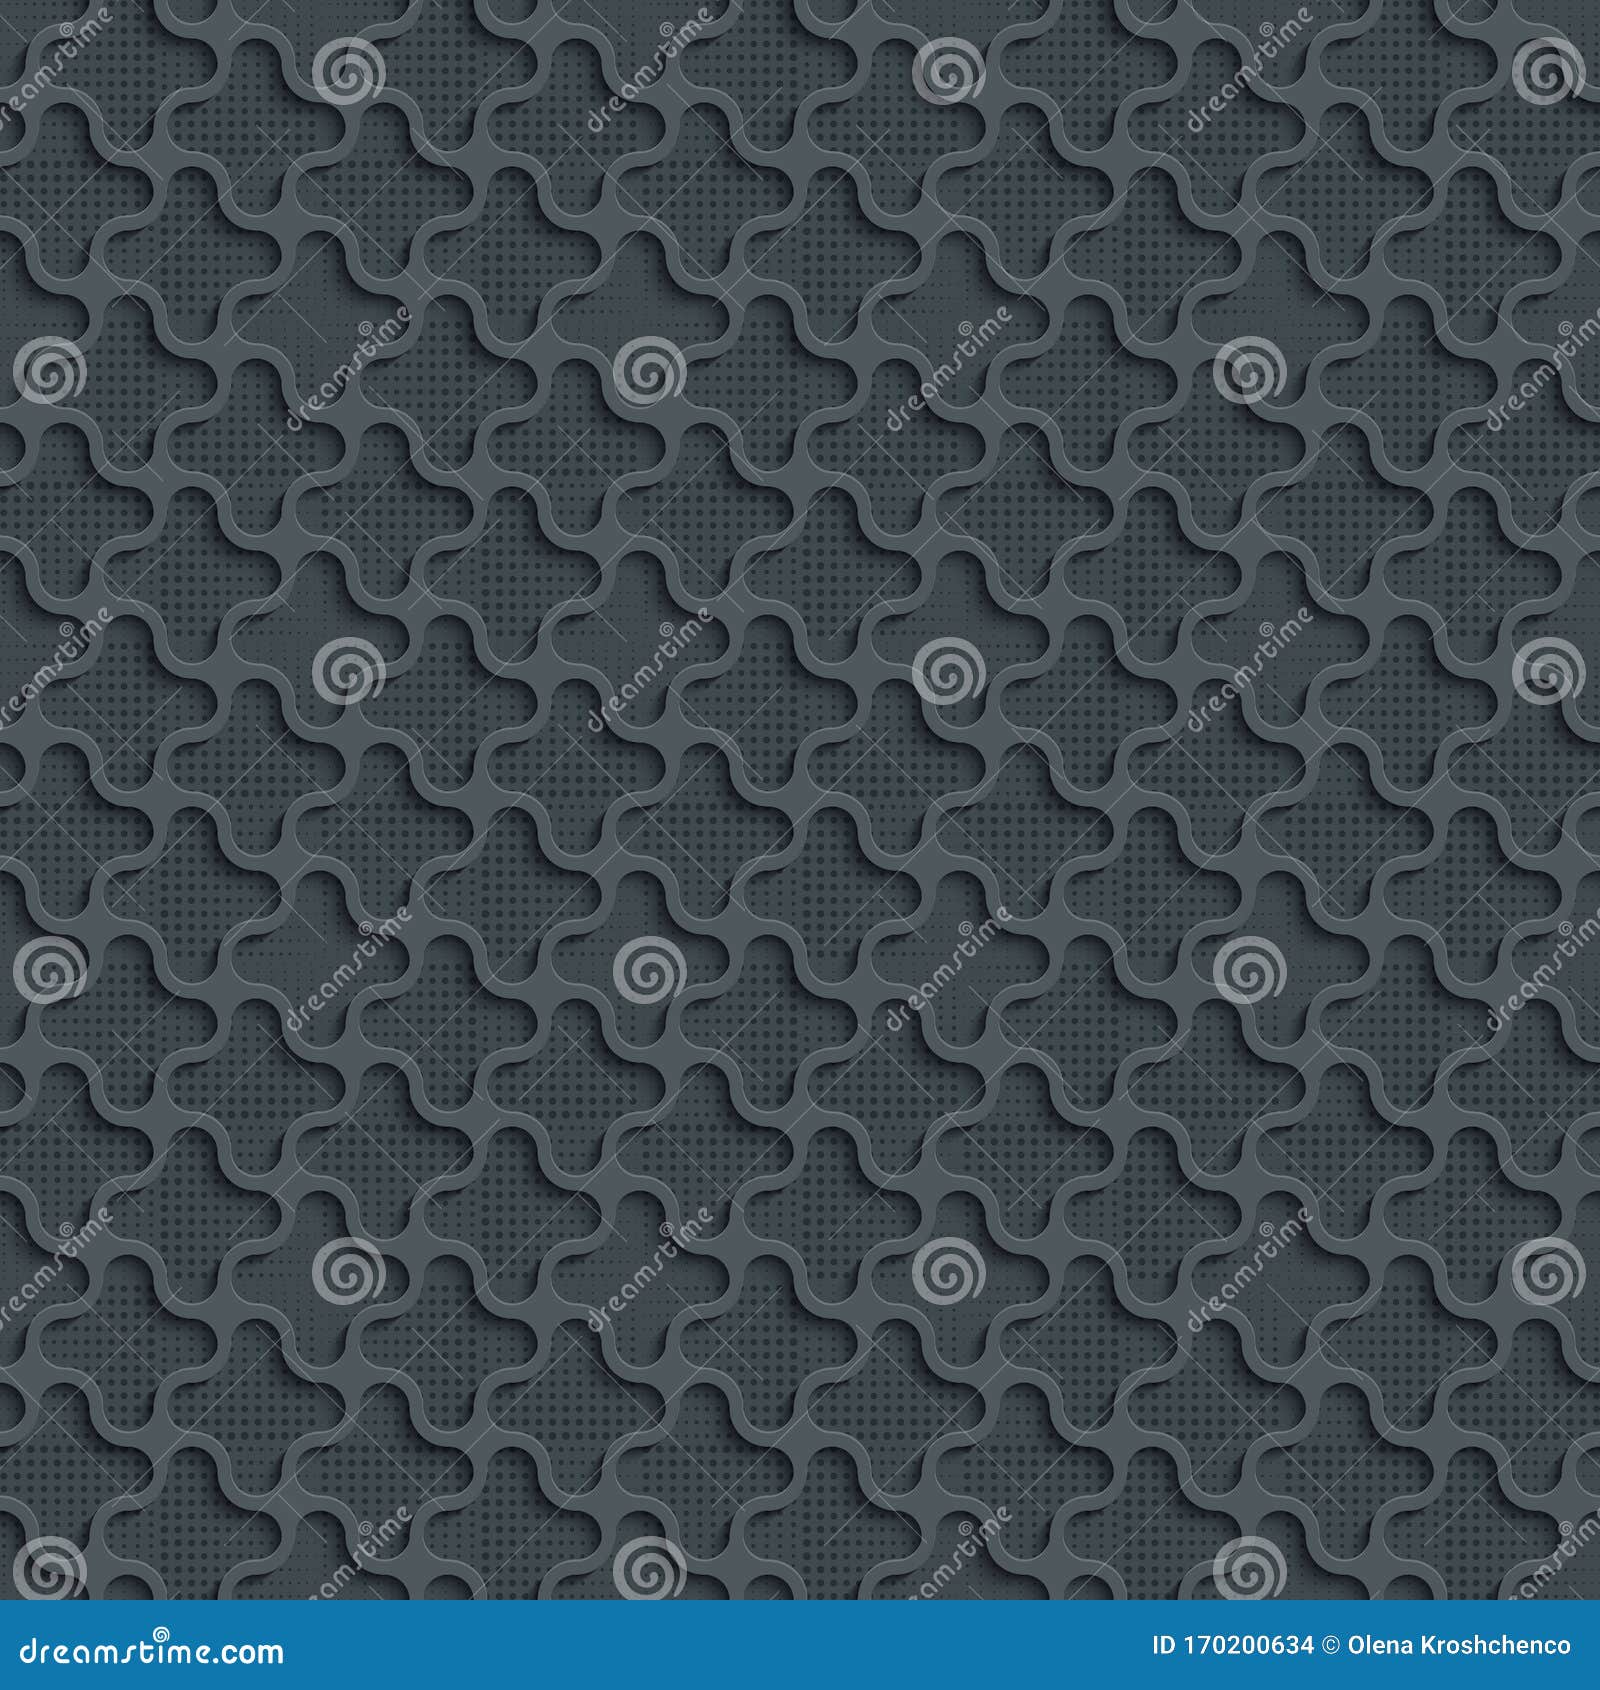 3d quadrilateral gray abstract seamless background pattern